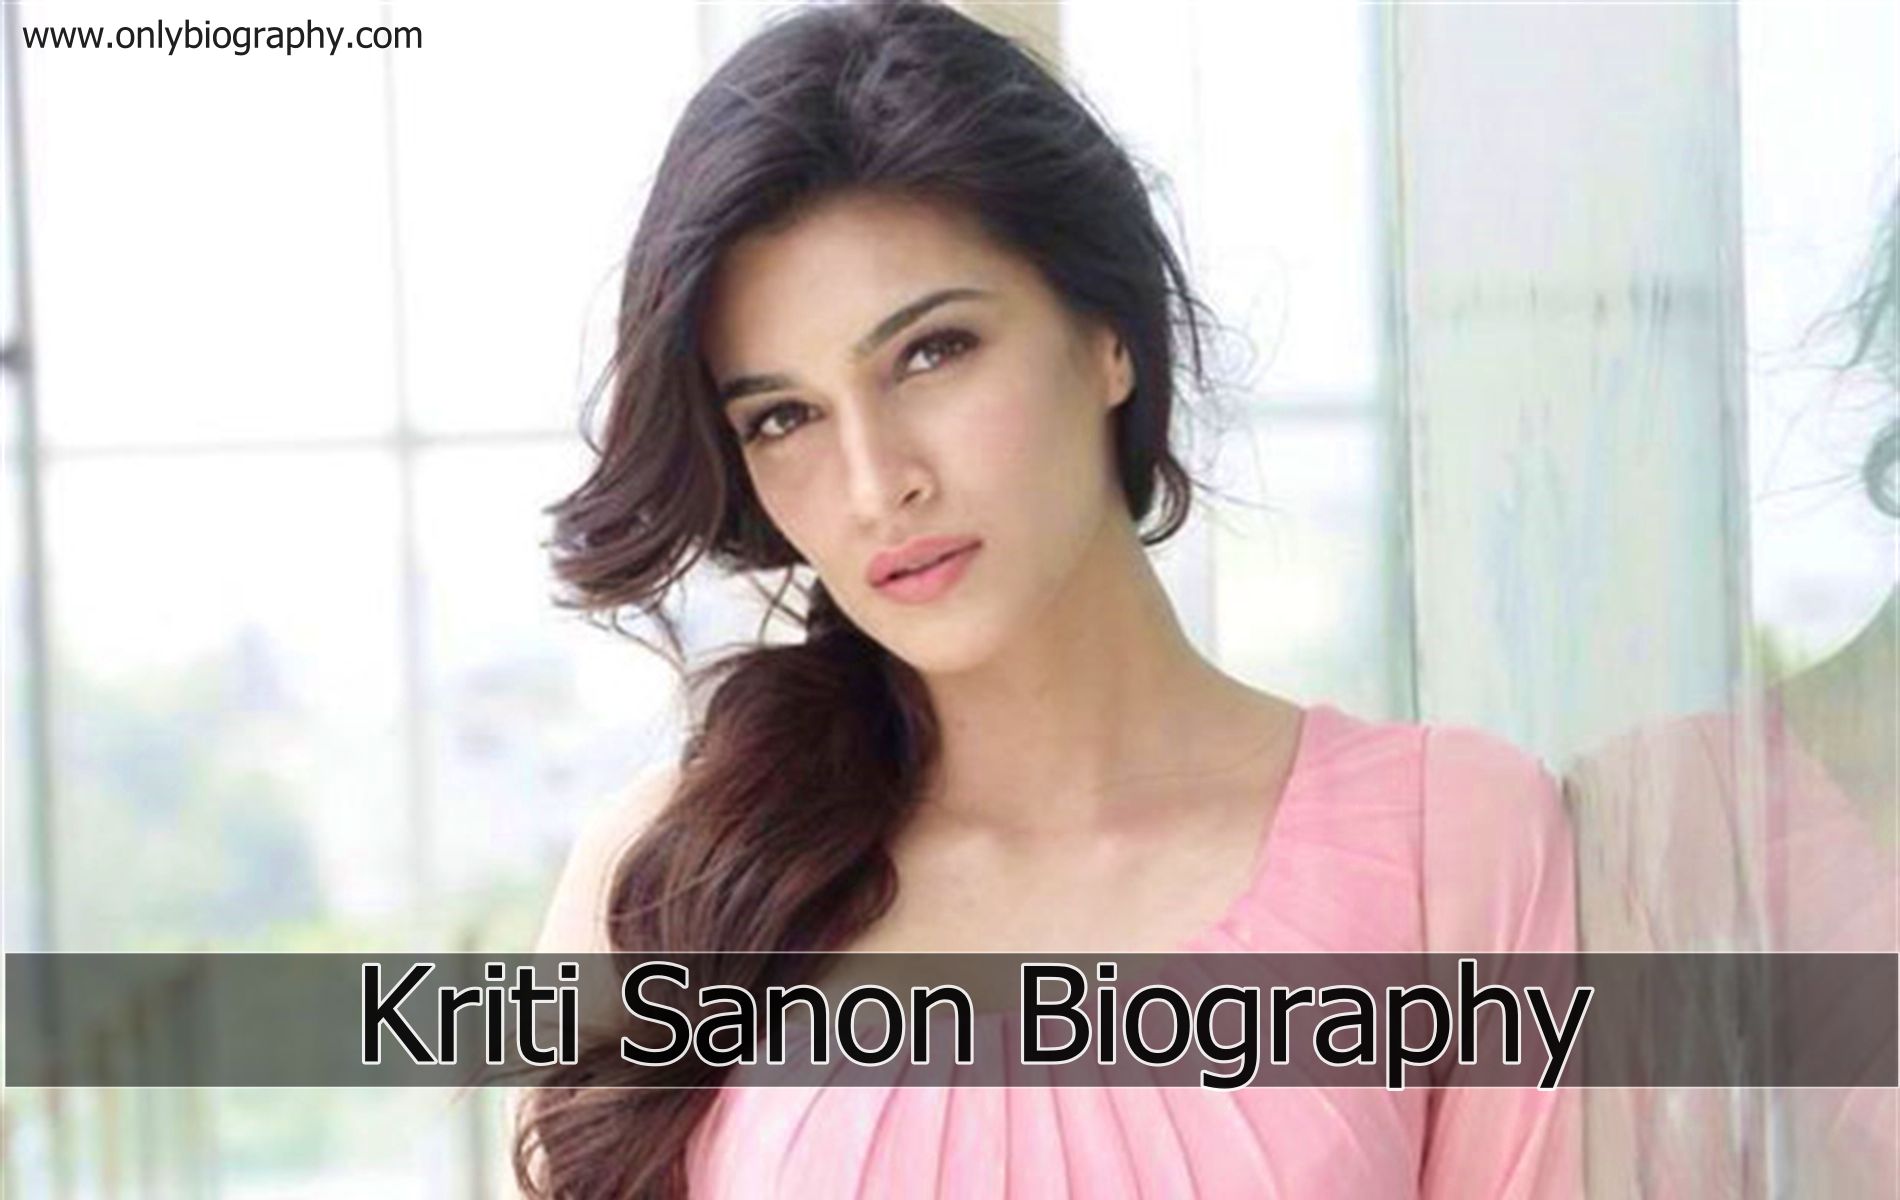 Kriti Sanon Biography - age, height, weight, family, boyfriend and more